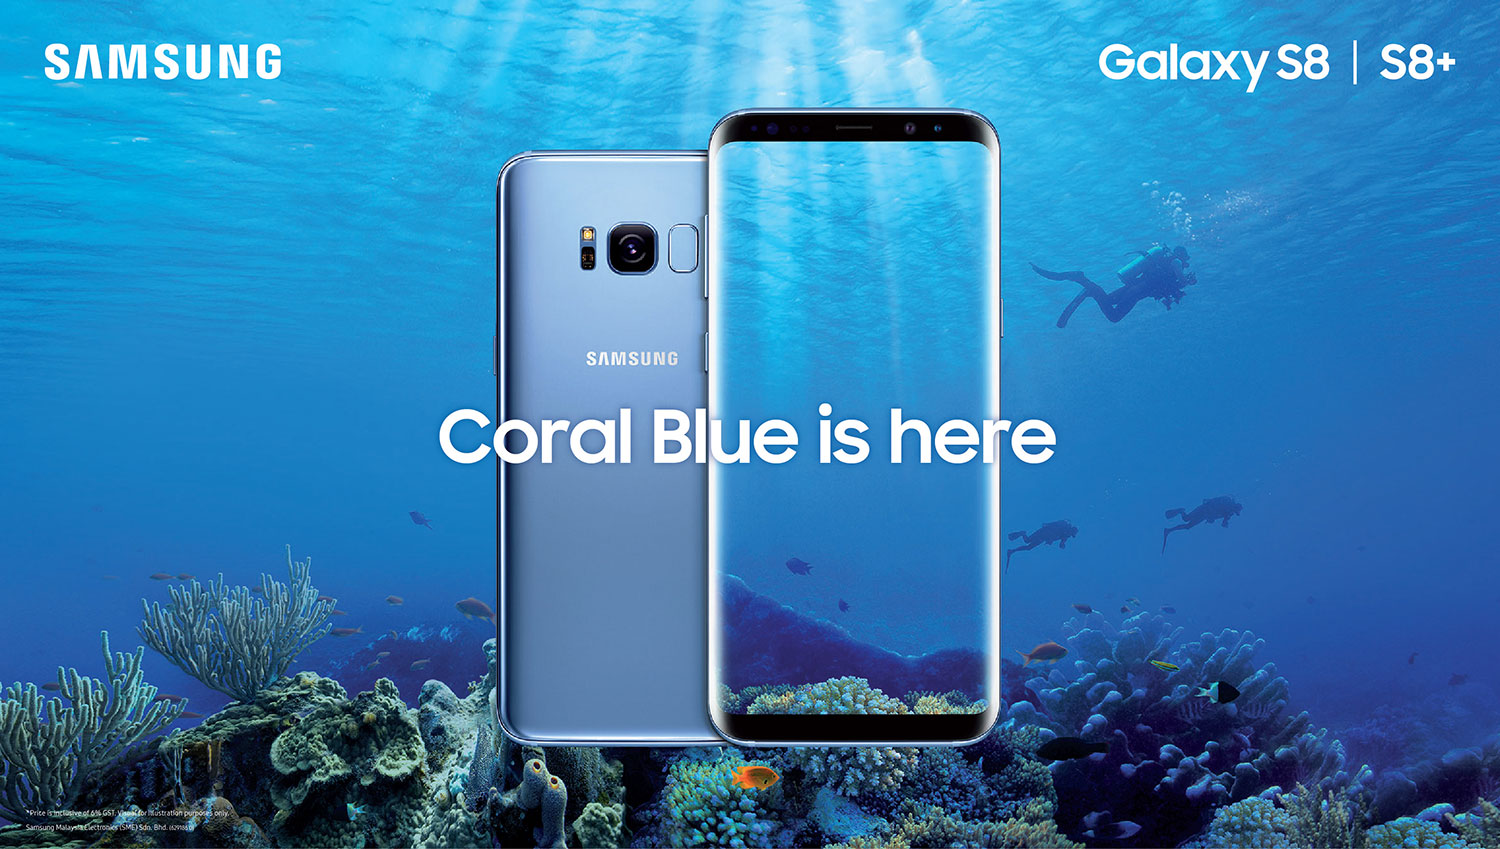 Samsung Galaxy S8 and S8+ Now Available in Coral Blue